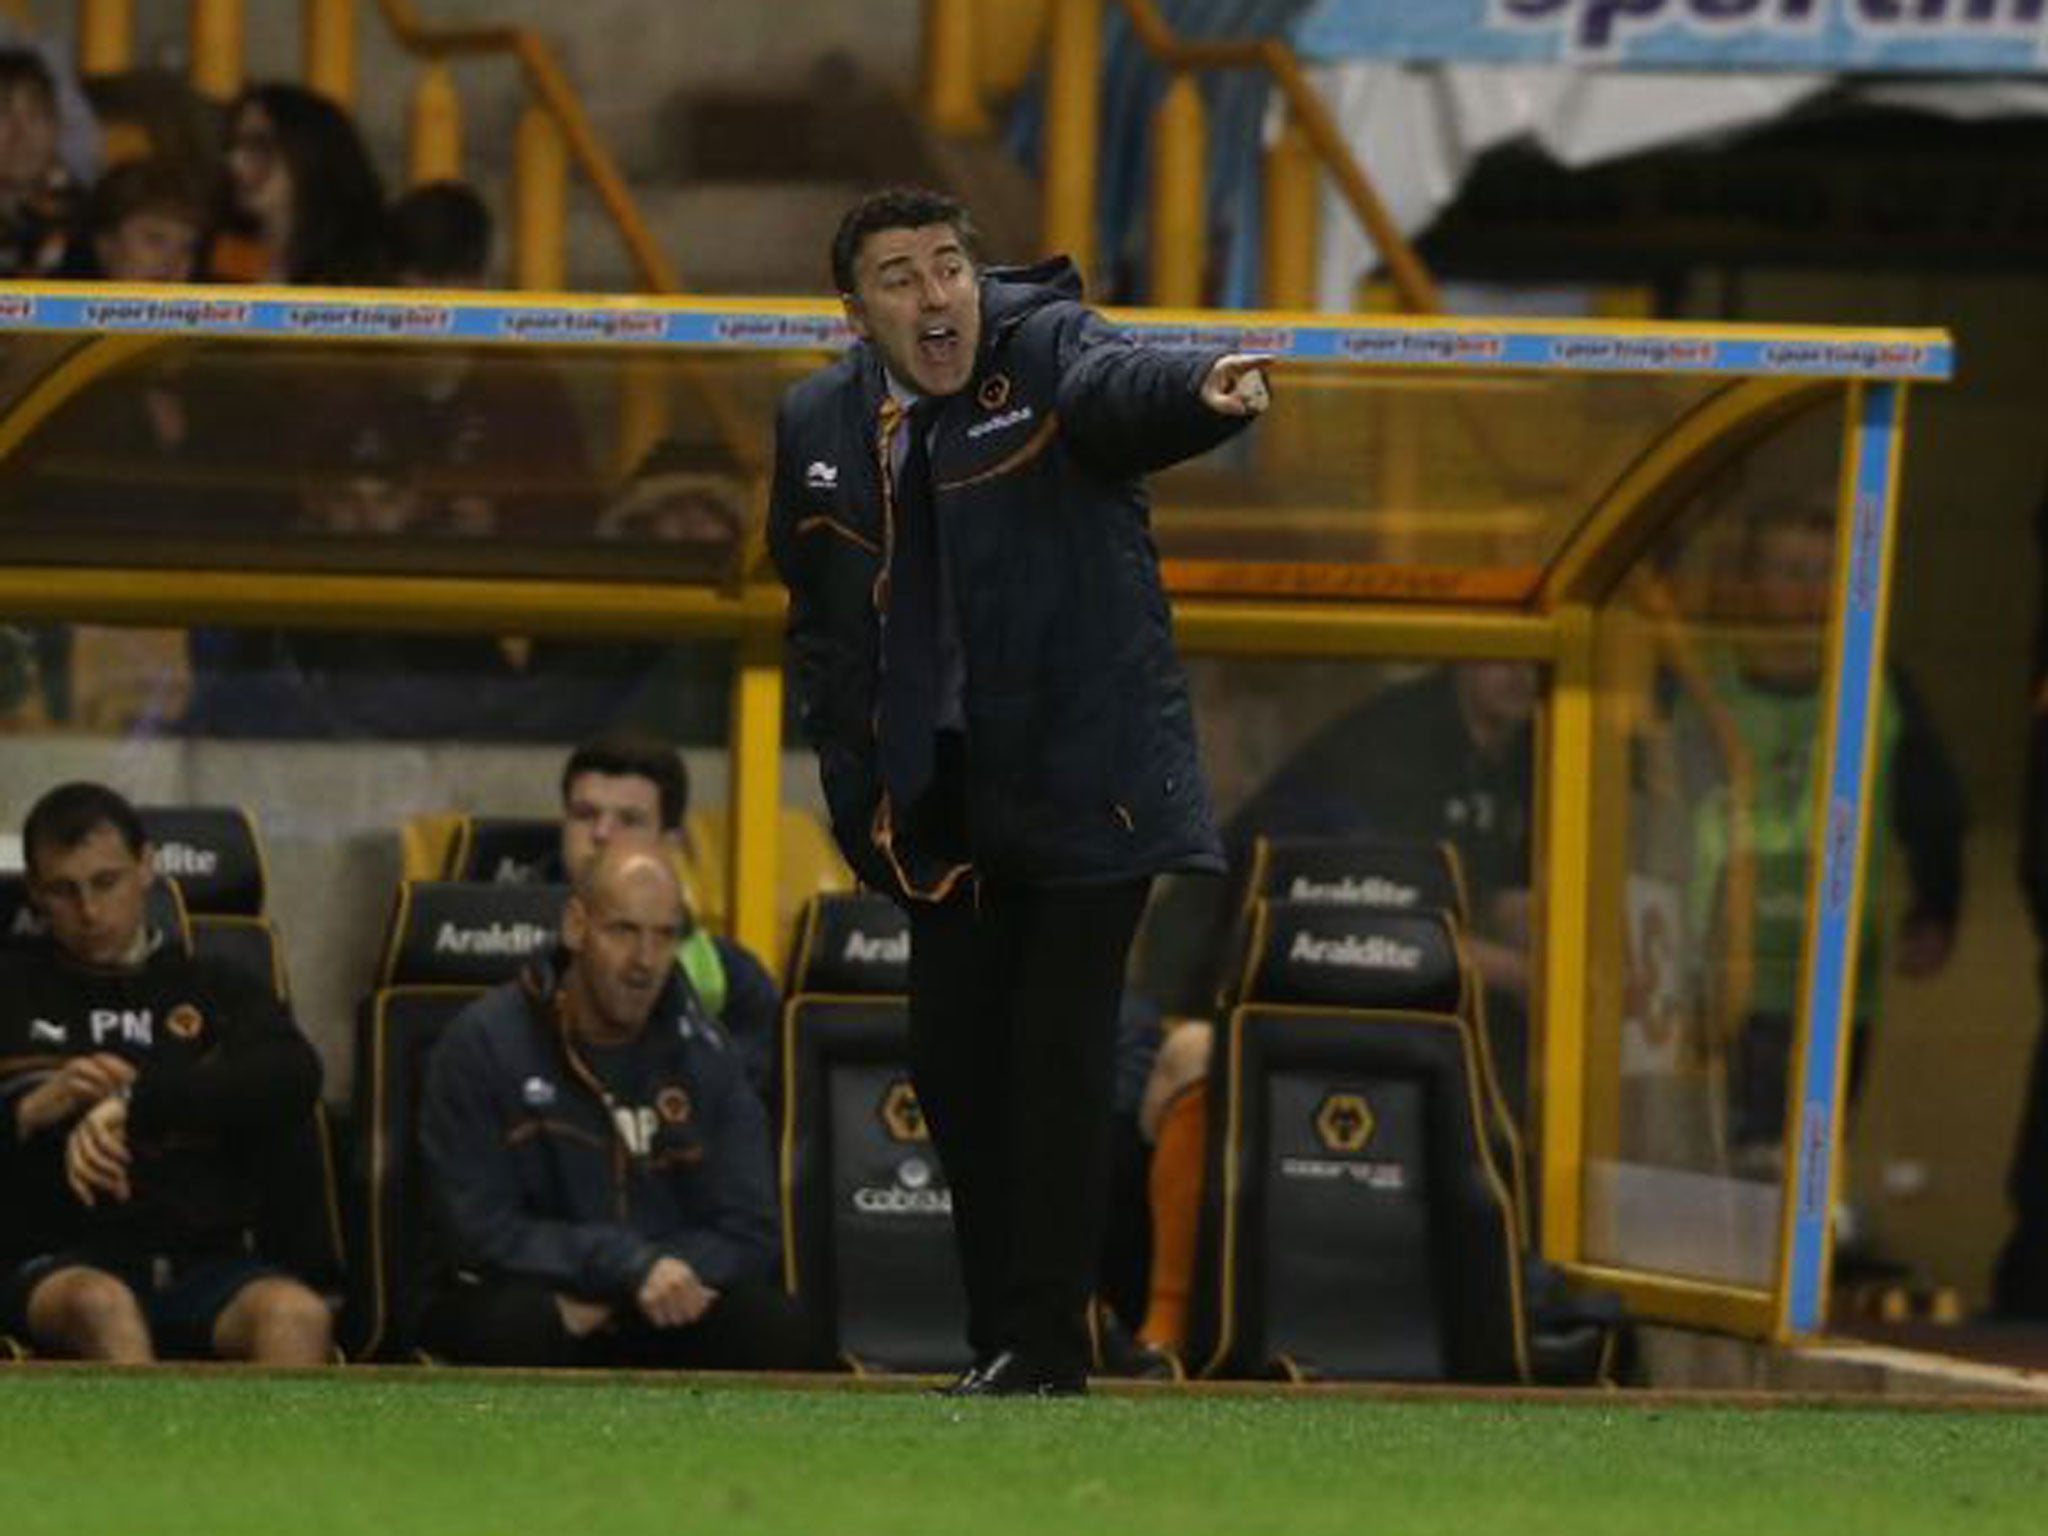 The Wolves manager suffered relegation with Doncaster last season